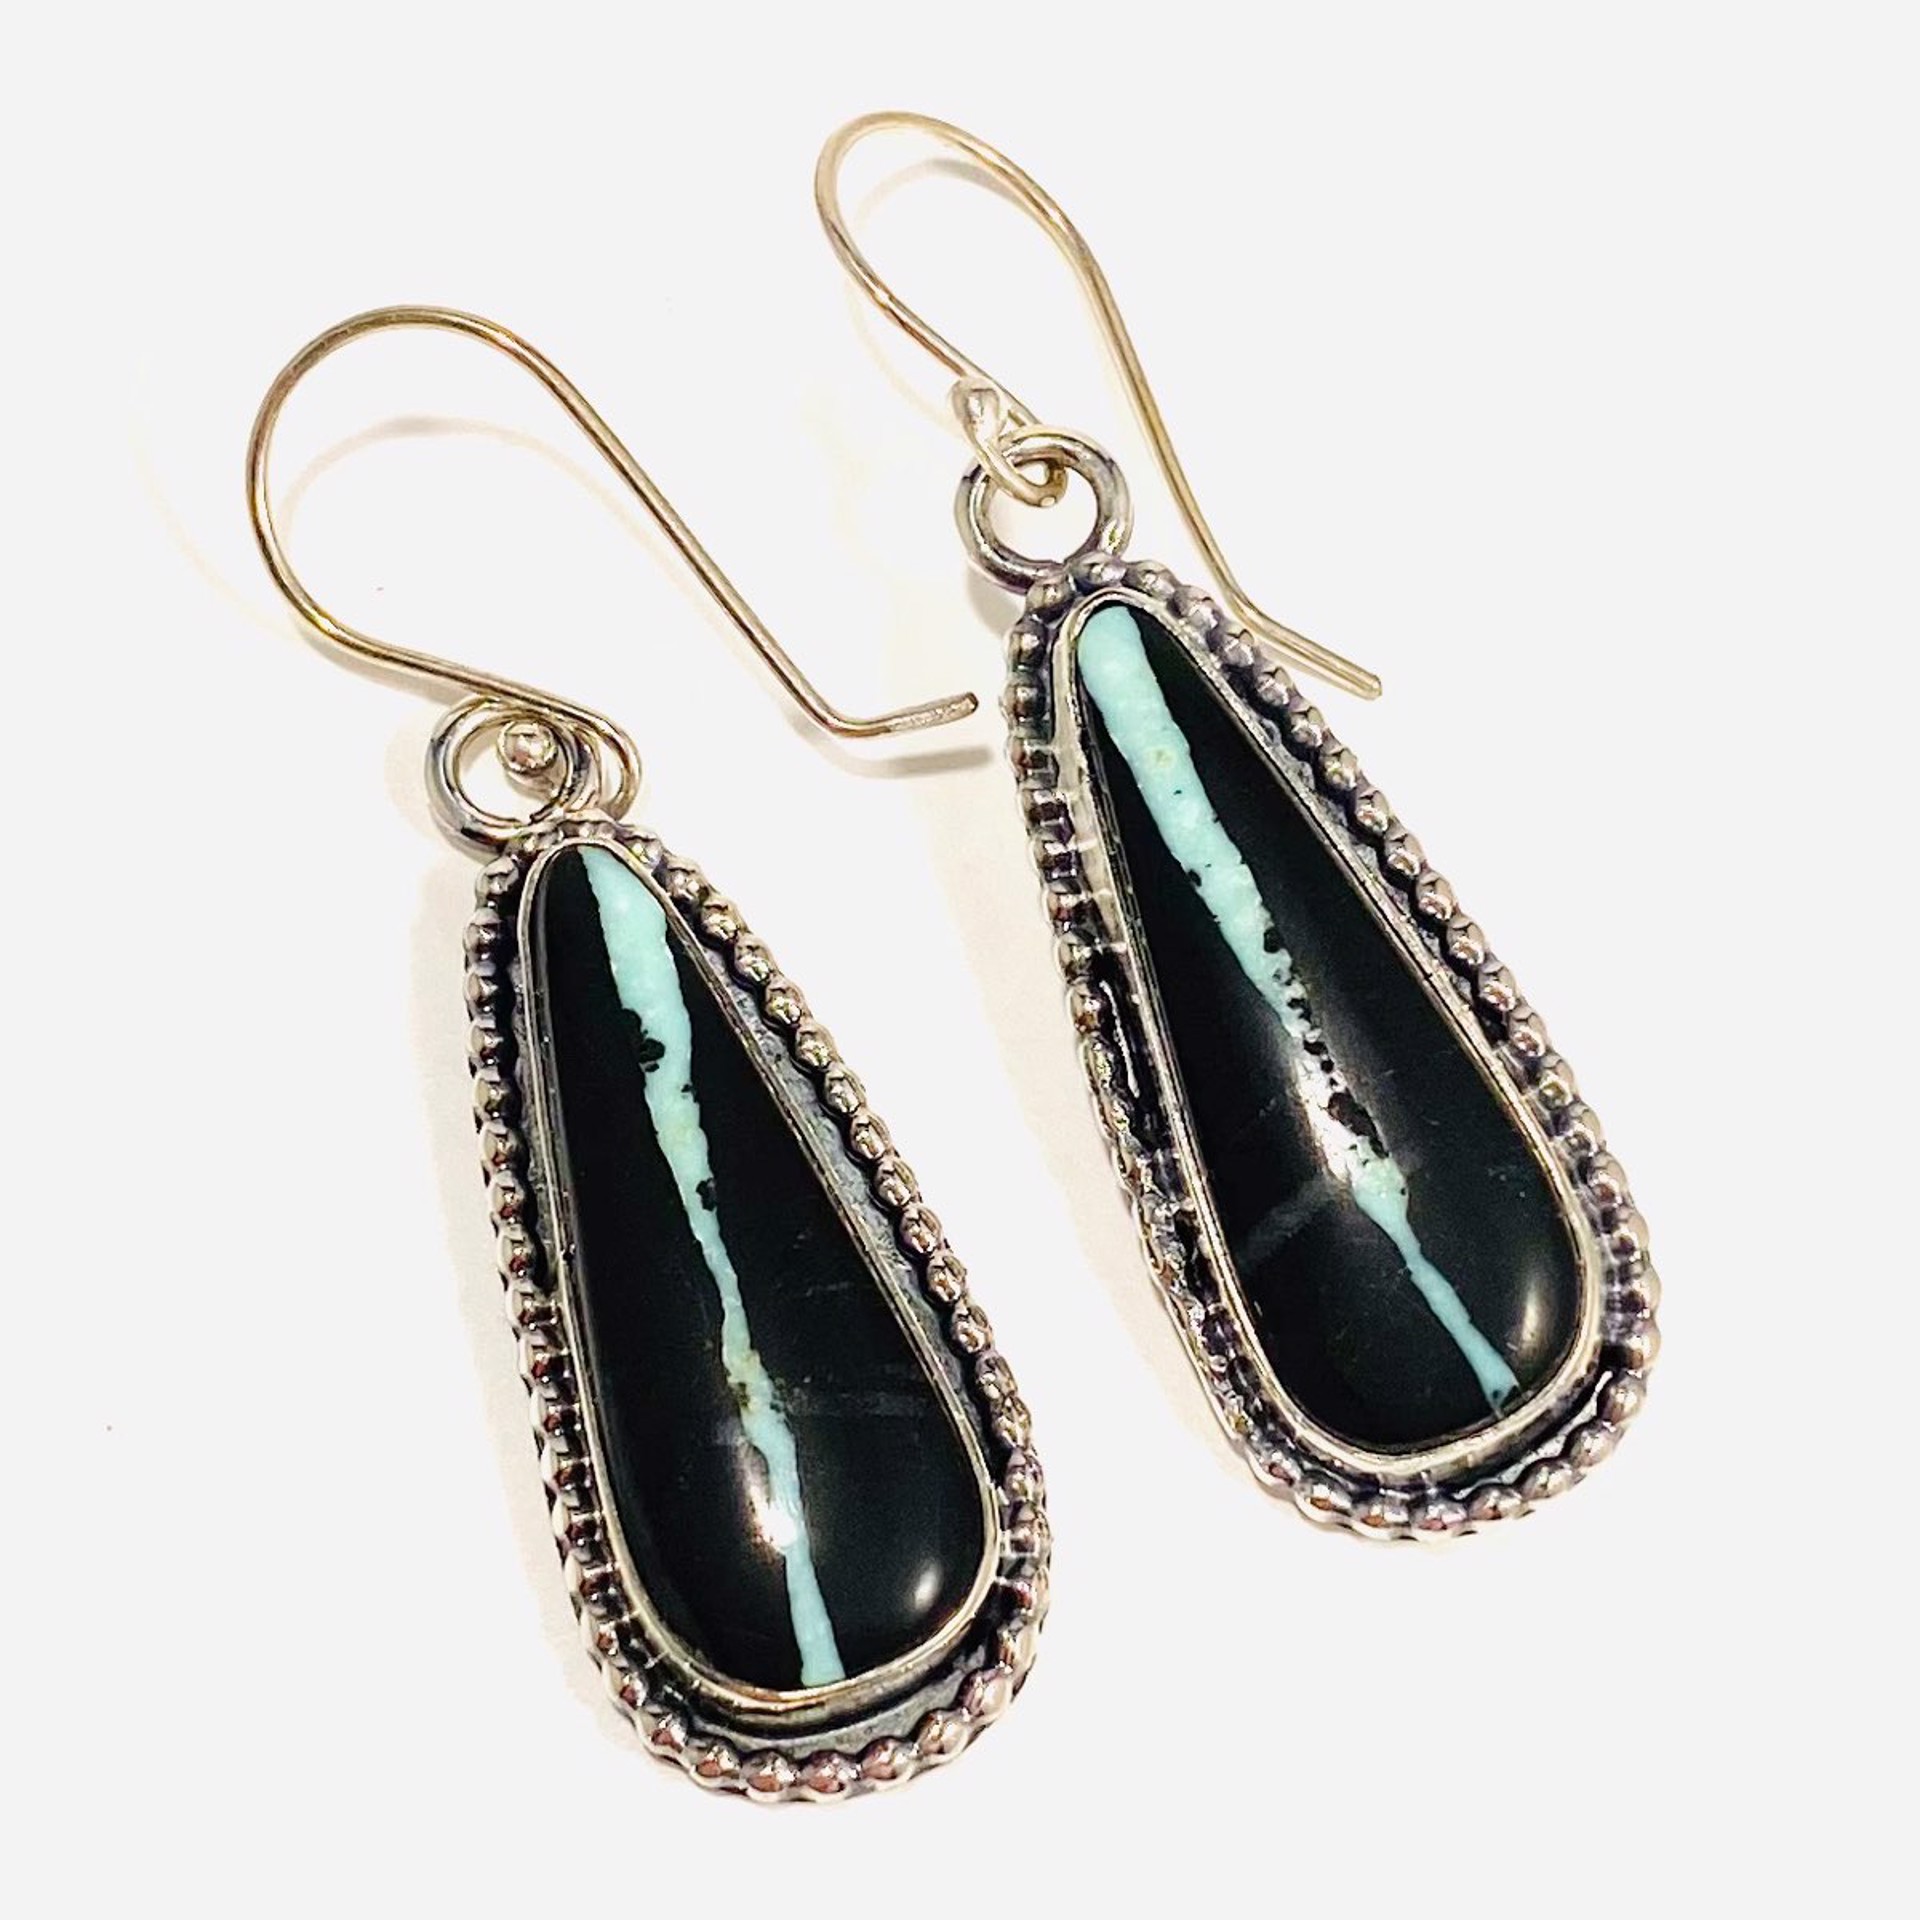 Thin Teardrop Black Buffalo Ribbon Turquoise Inlay with Bead Bezel Earrings AB22-51 by Anne Bivens